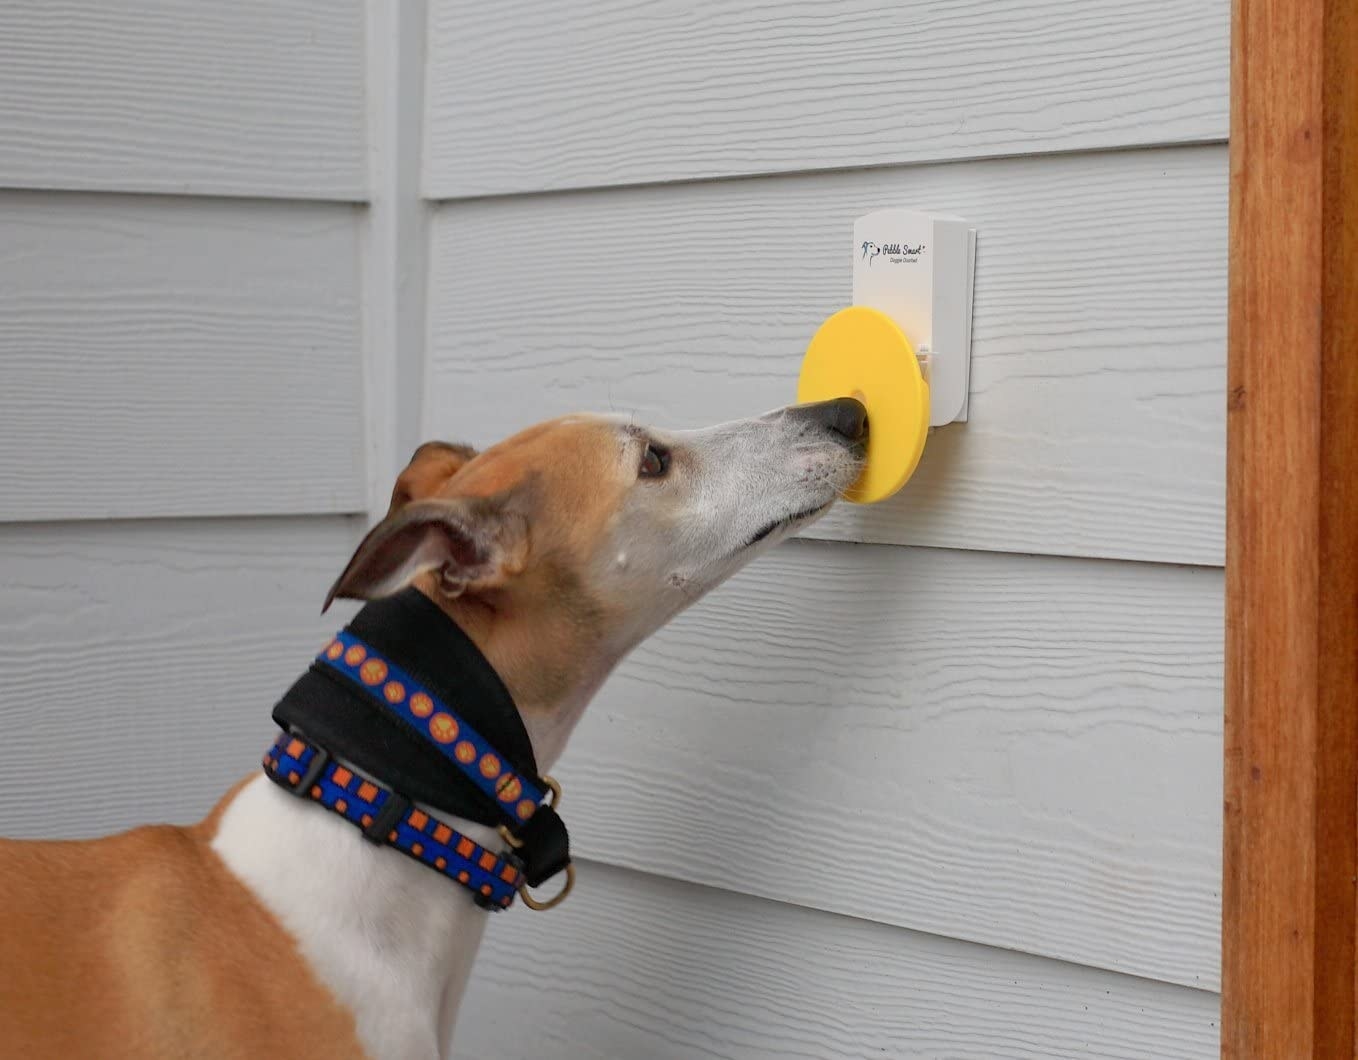 A dog uses the doorbell